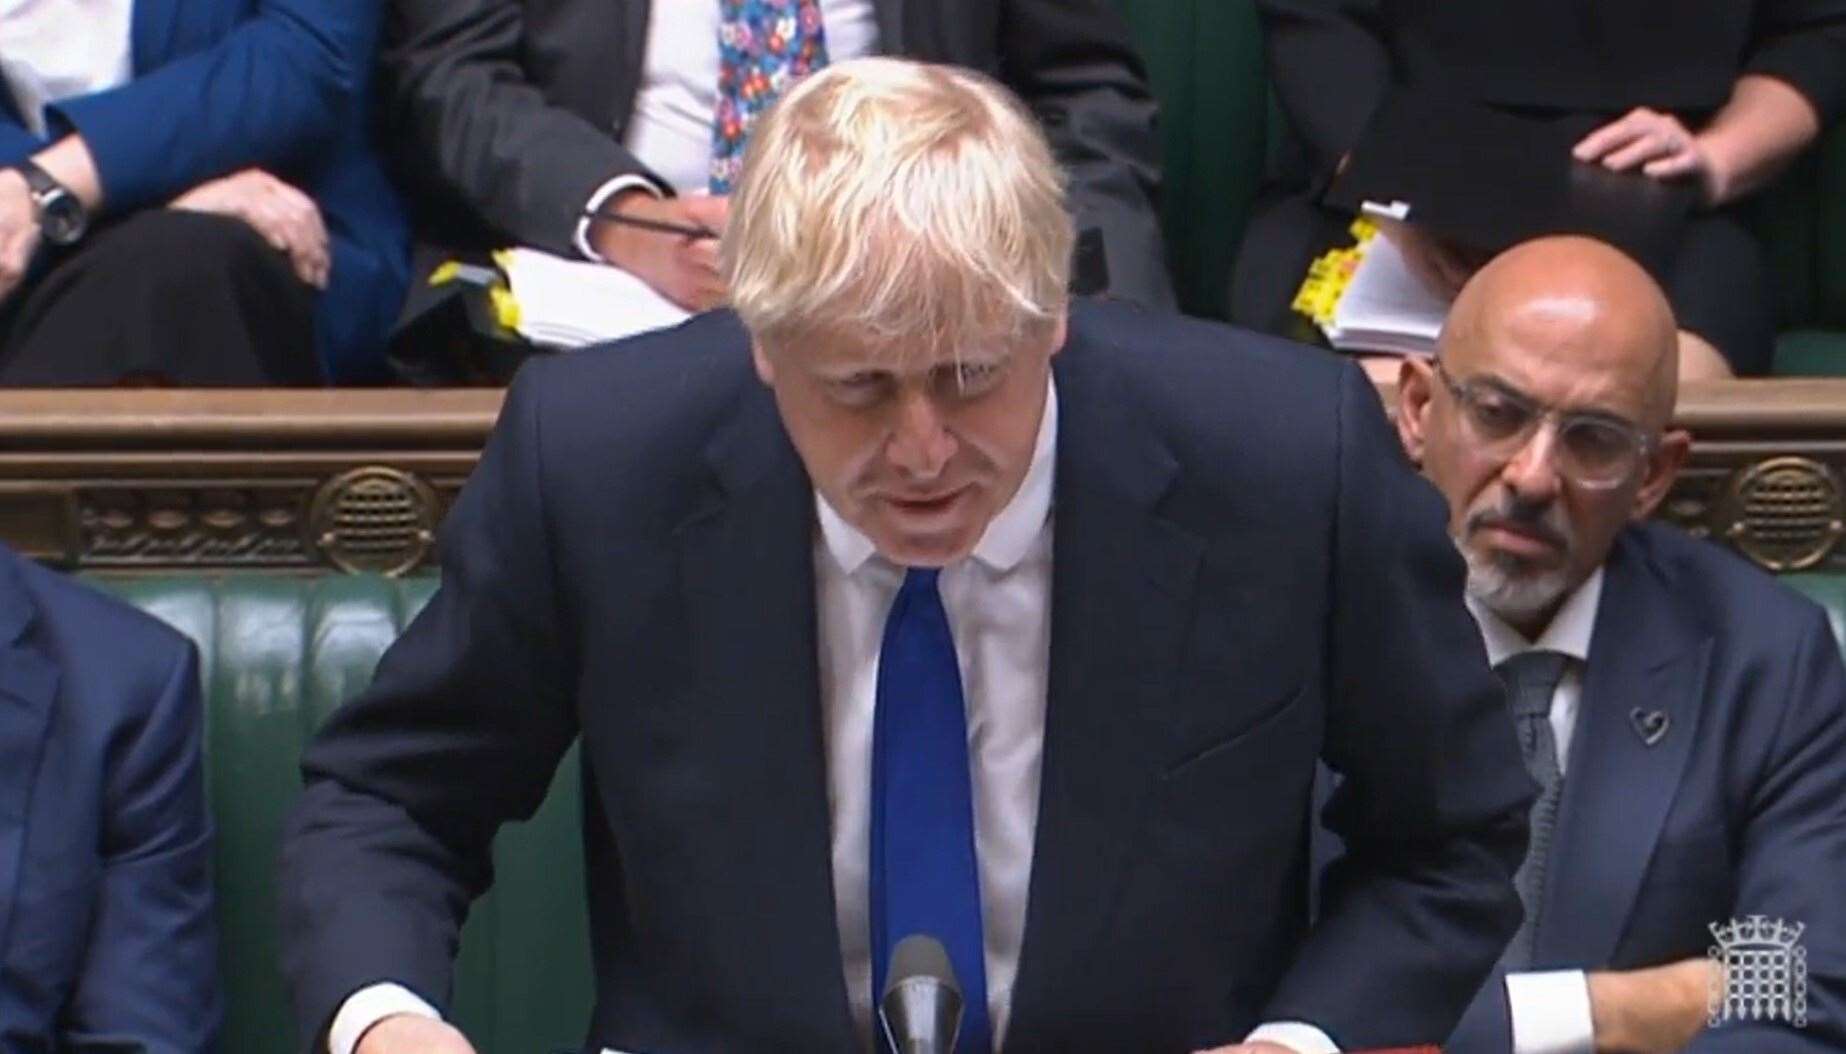 Boris Johnson during Prime Minister’s Questions (House of Commons/PA)